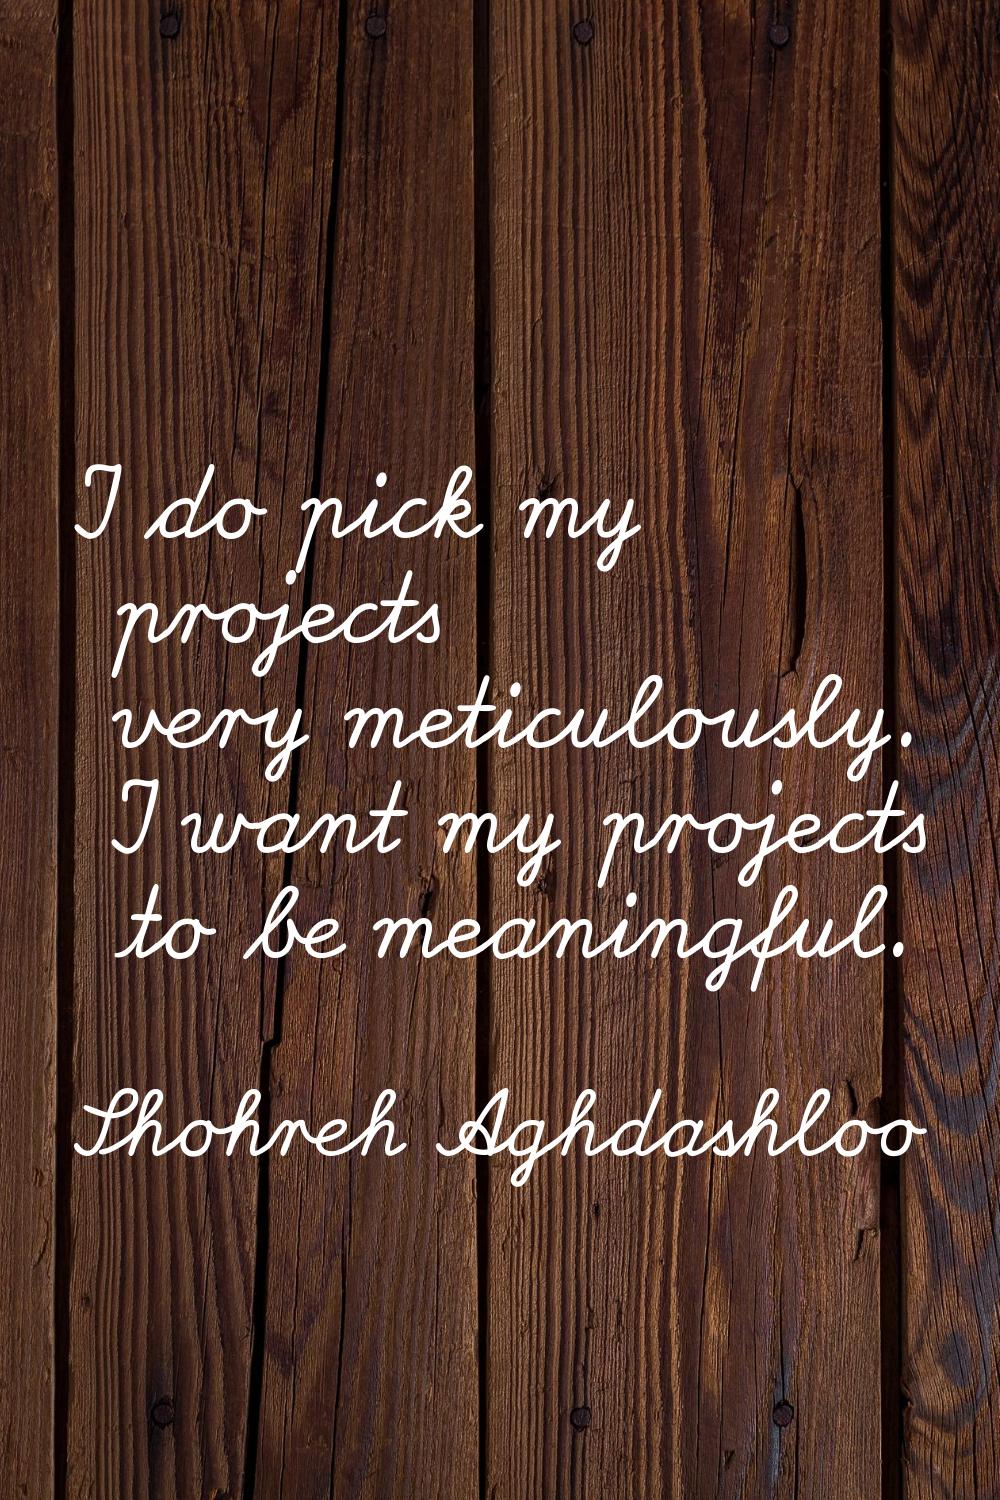 I do pick my projects very meticulously. I want my projects to be meaningful.